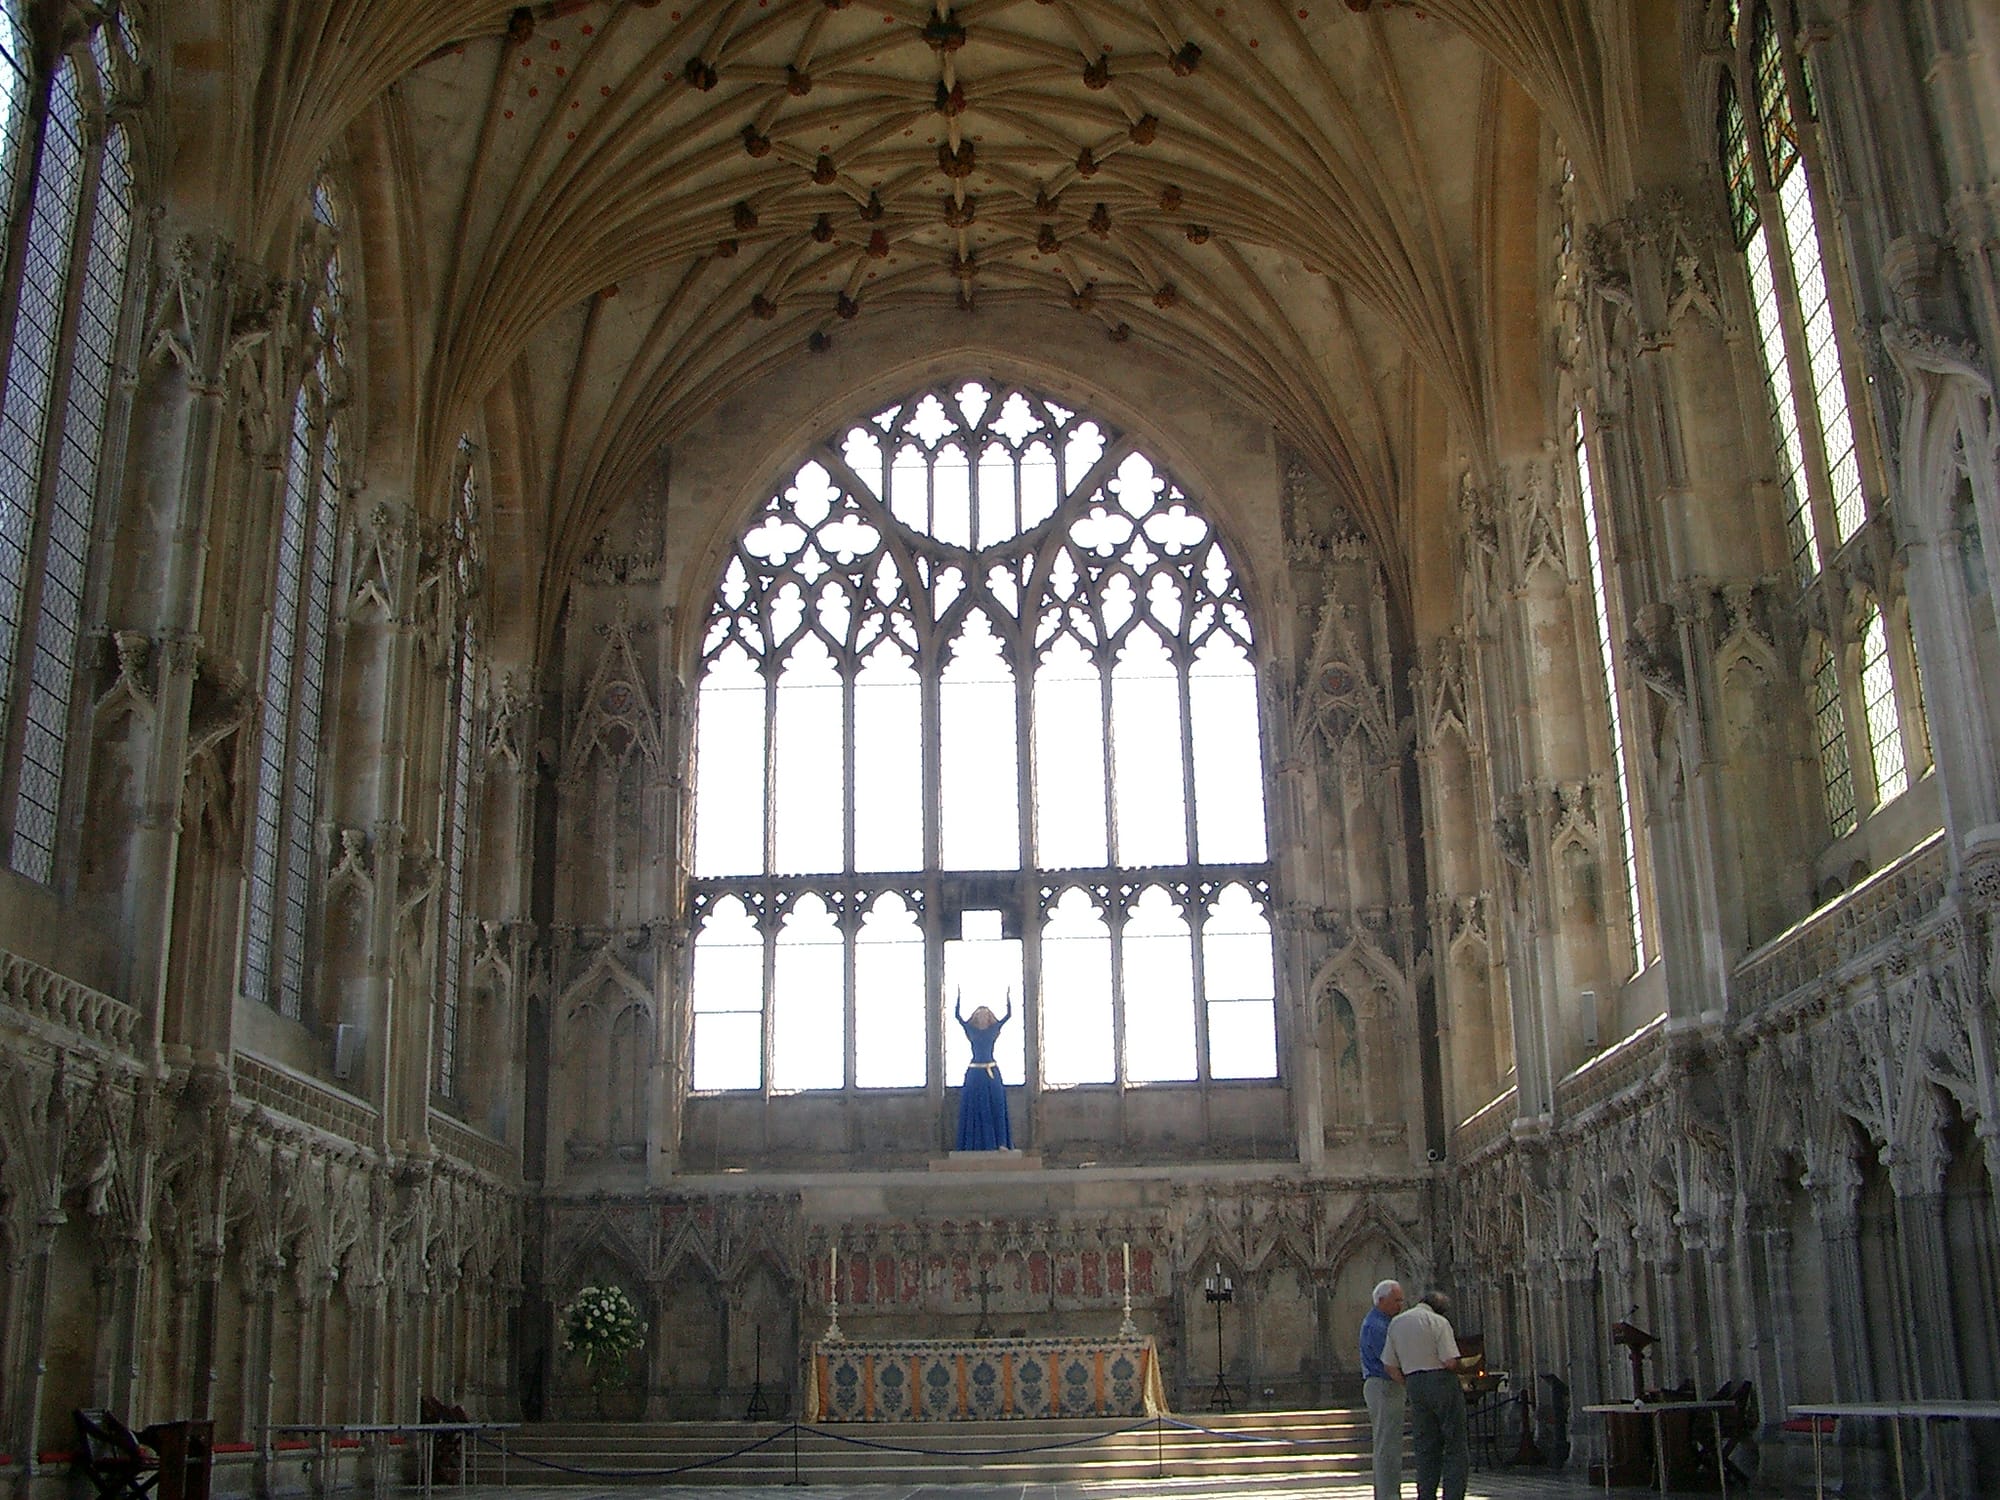 Lady Chapel, Ely Cathedral, Ely, England ©2006 GRevelstoke